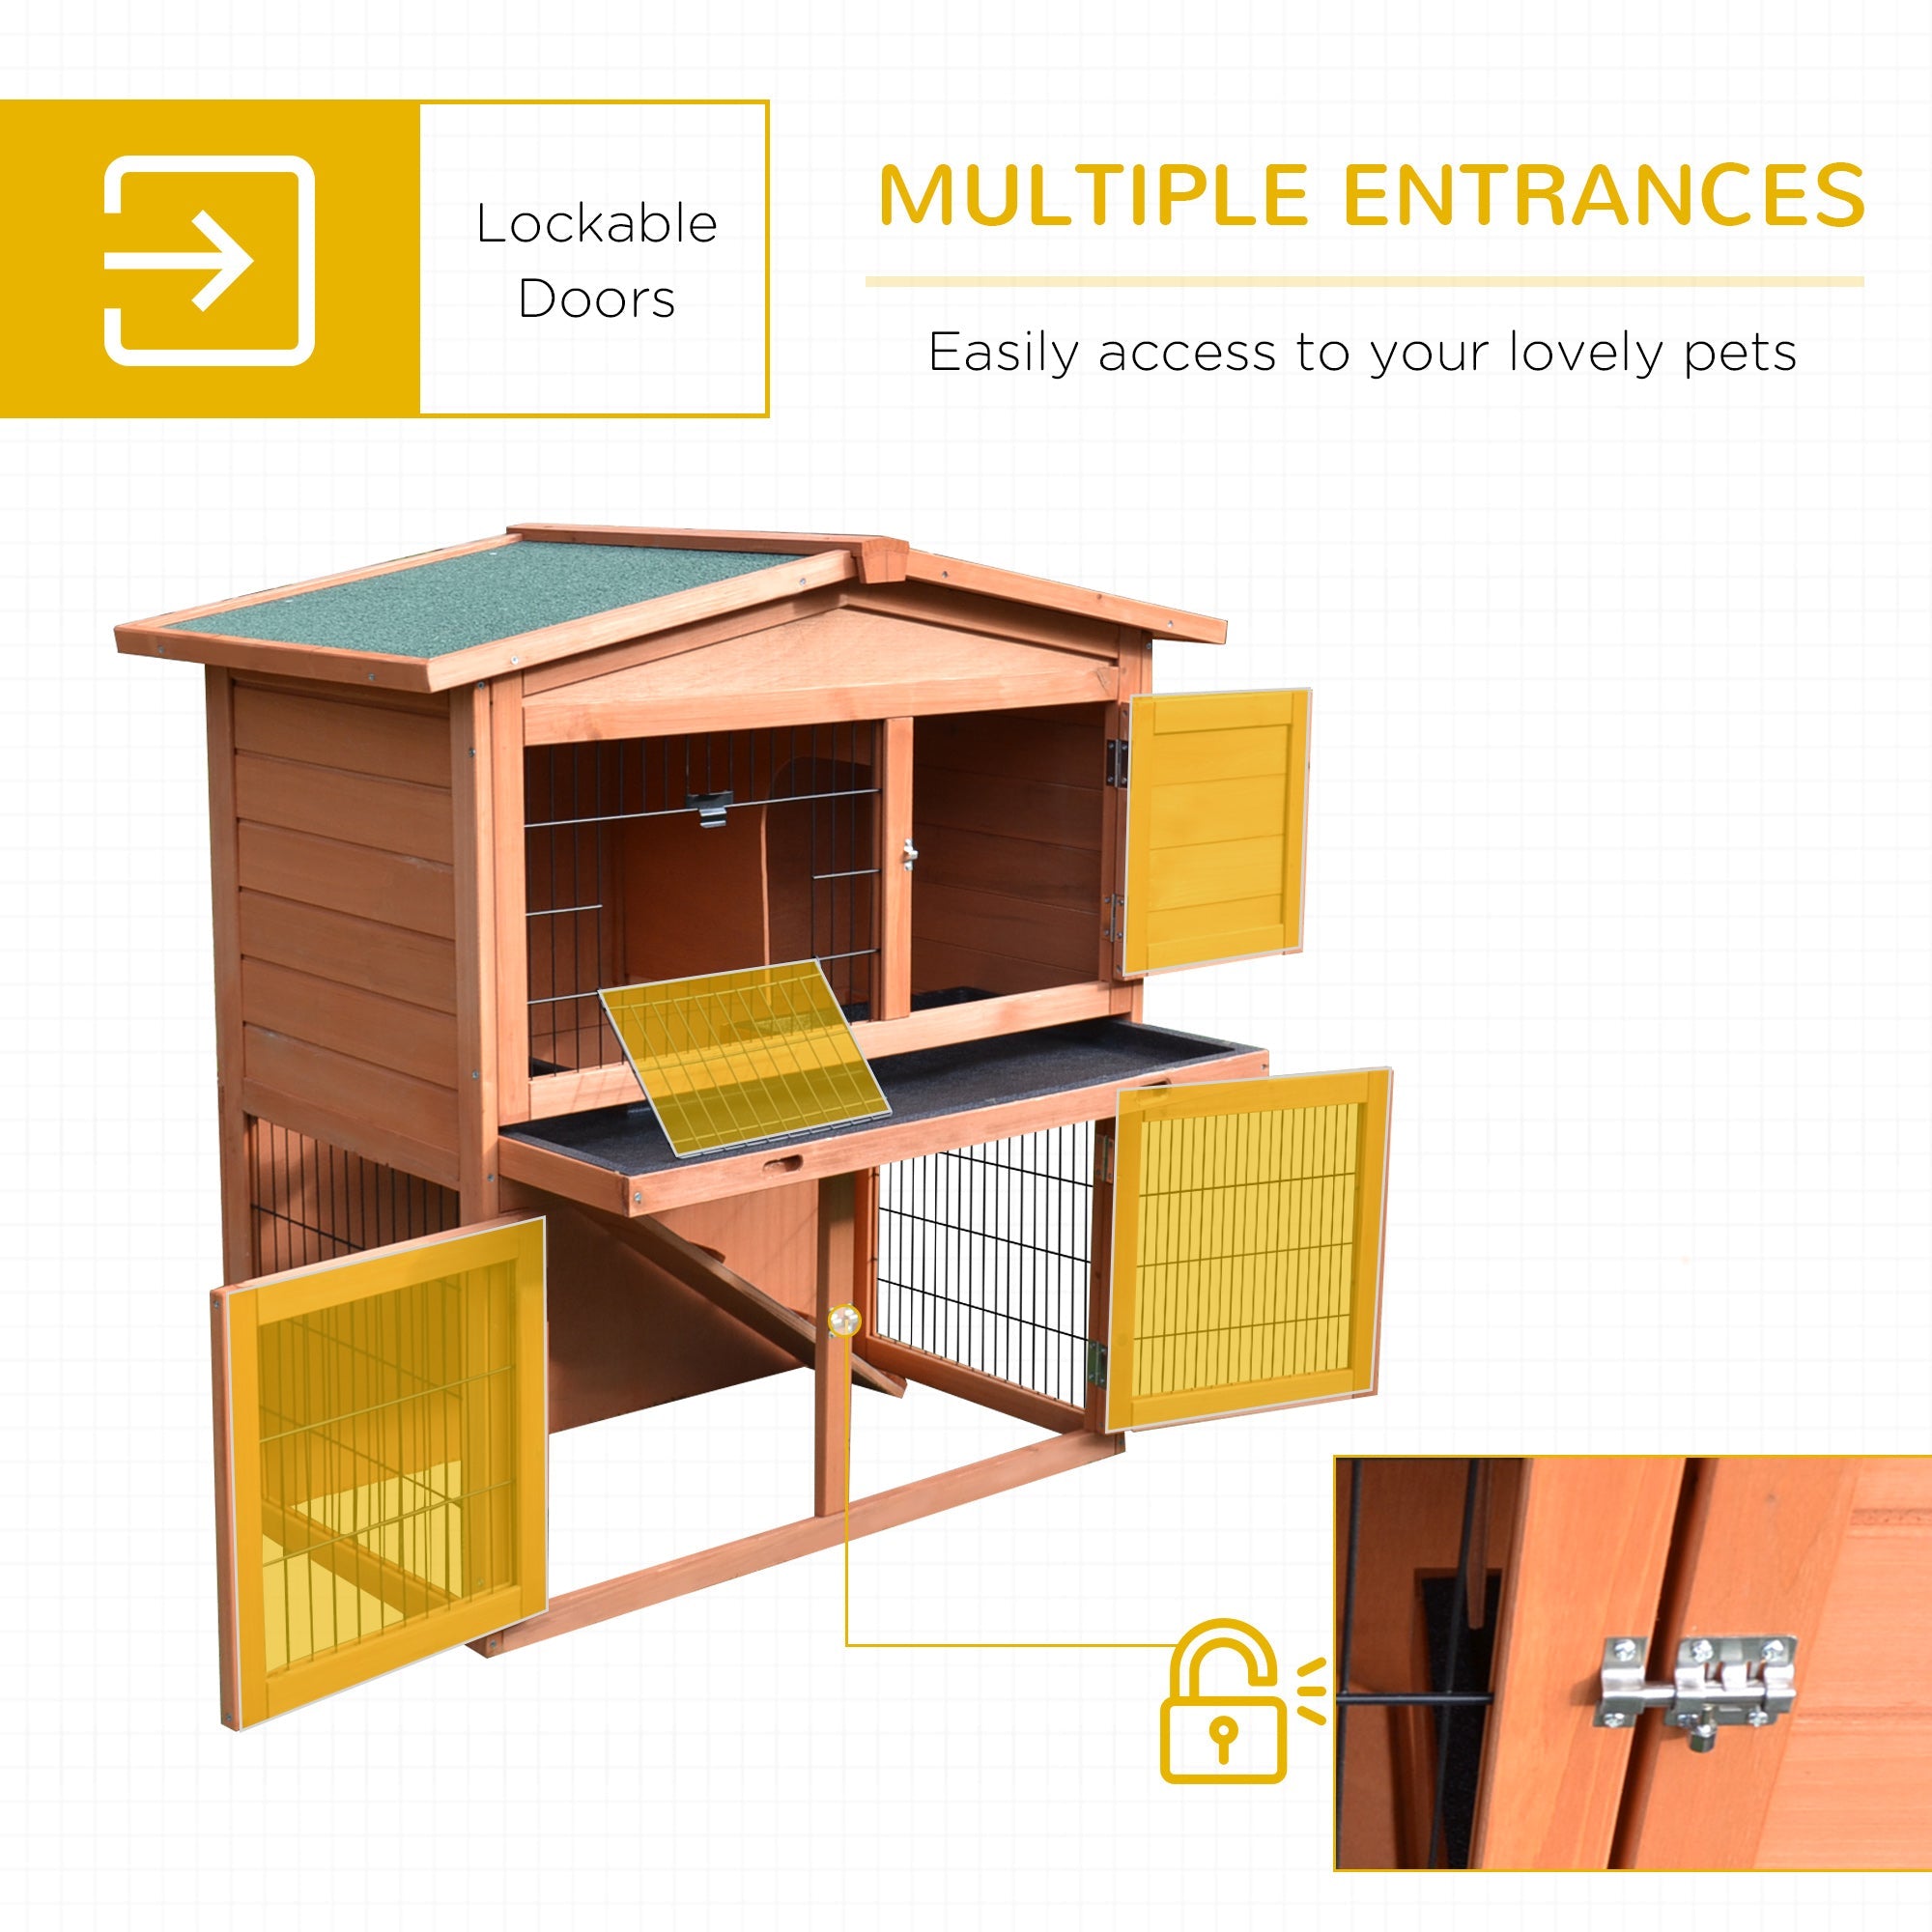 2 Tier Rabbit Hutch Guinea Pig Hutch Ferret Cage with Ramp Slide Out Tray for Indoor Outdoor 100.5 x 55 x 101 cm-4